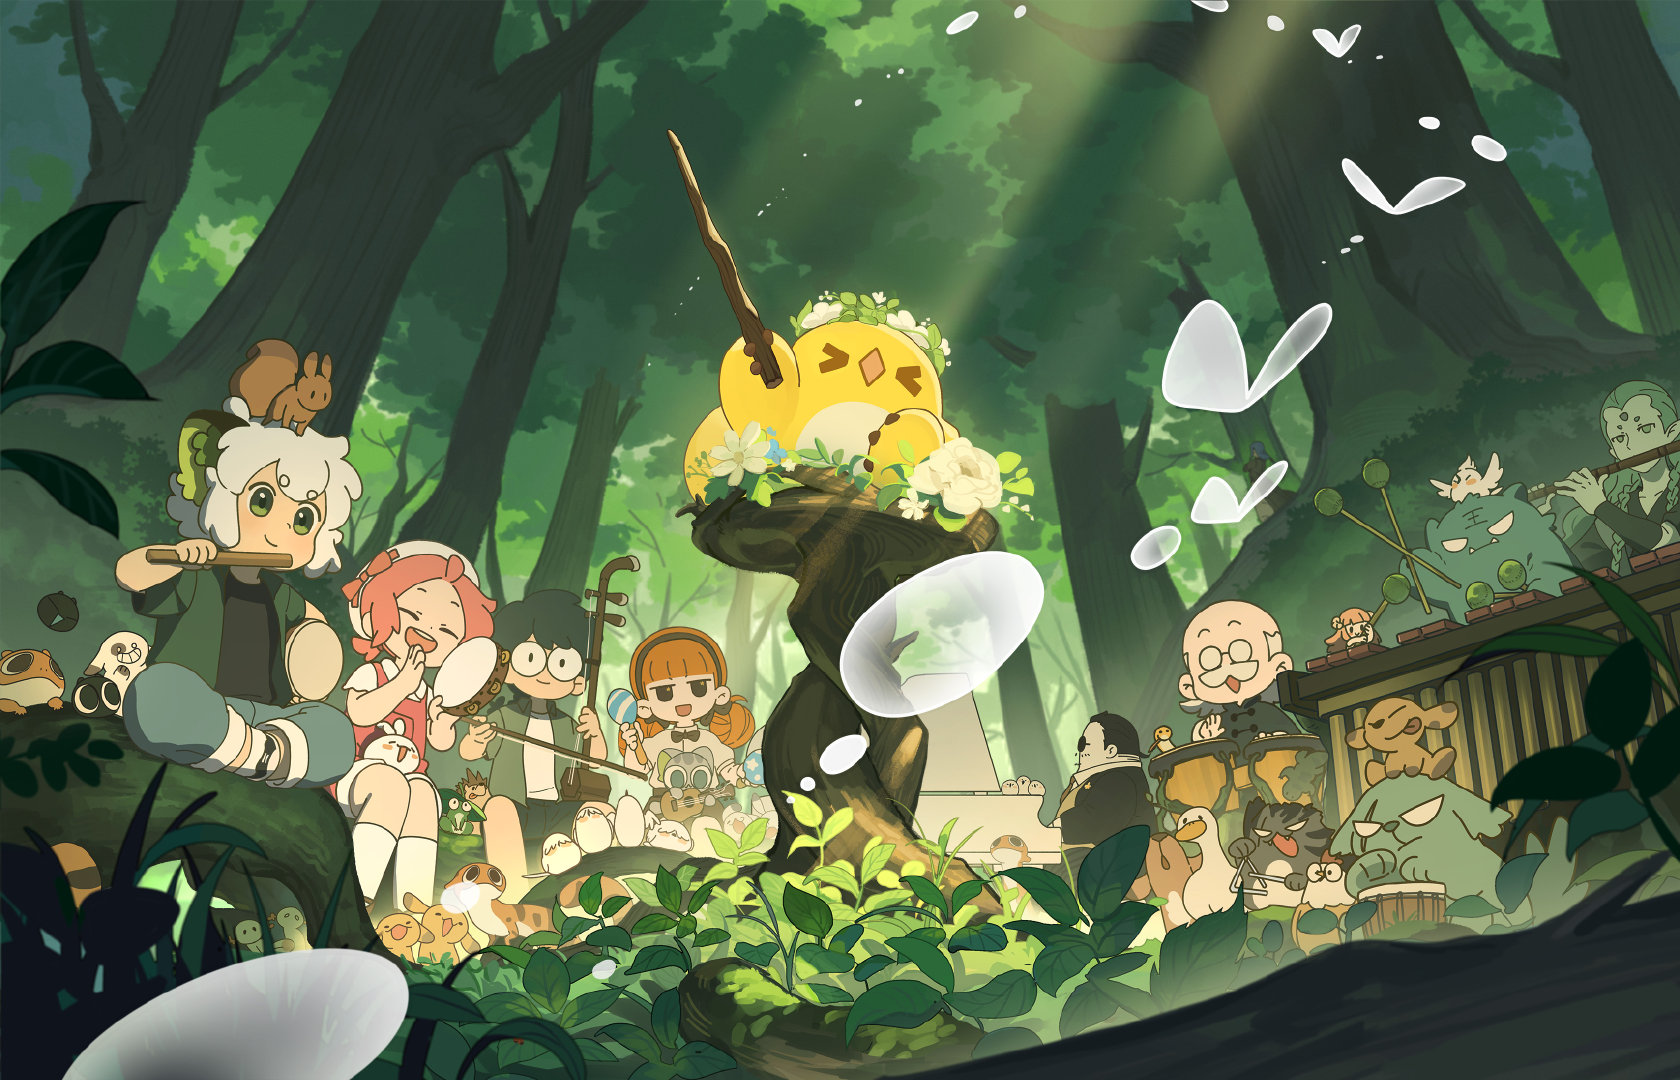 Anime 1680x1080 artwork anime boys forest animals The Legend of Luo Xiaohei Luo Xiaohei anime girls sunlight branch sitting trees bangs women outdoors outdoors men outdoors leaves musical instrument flowers